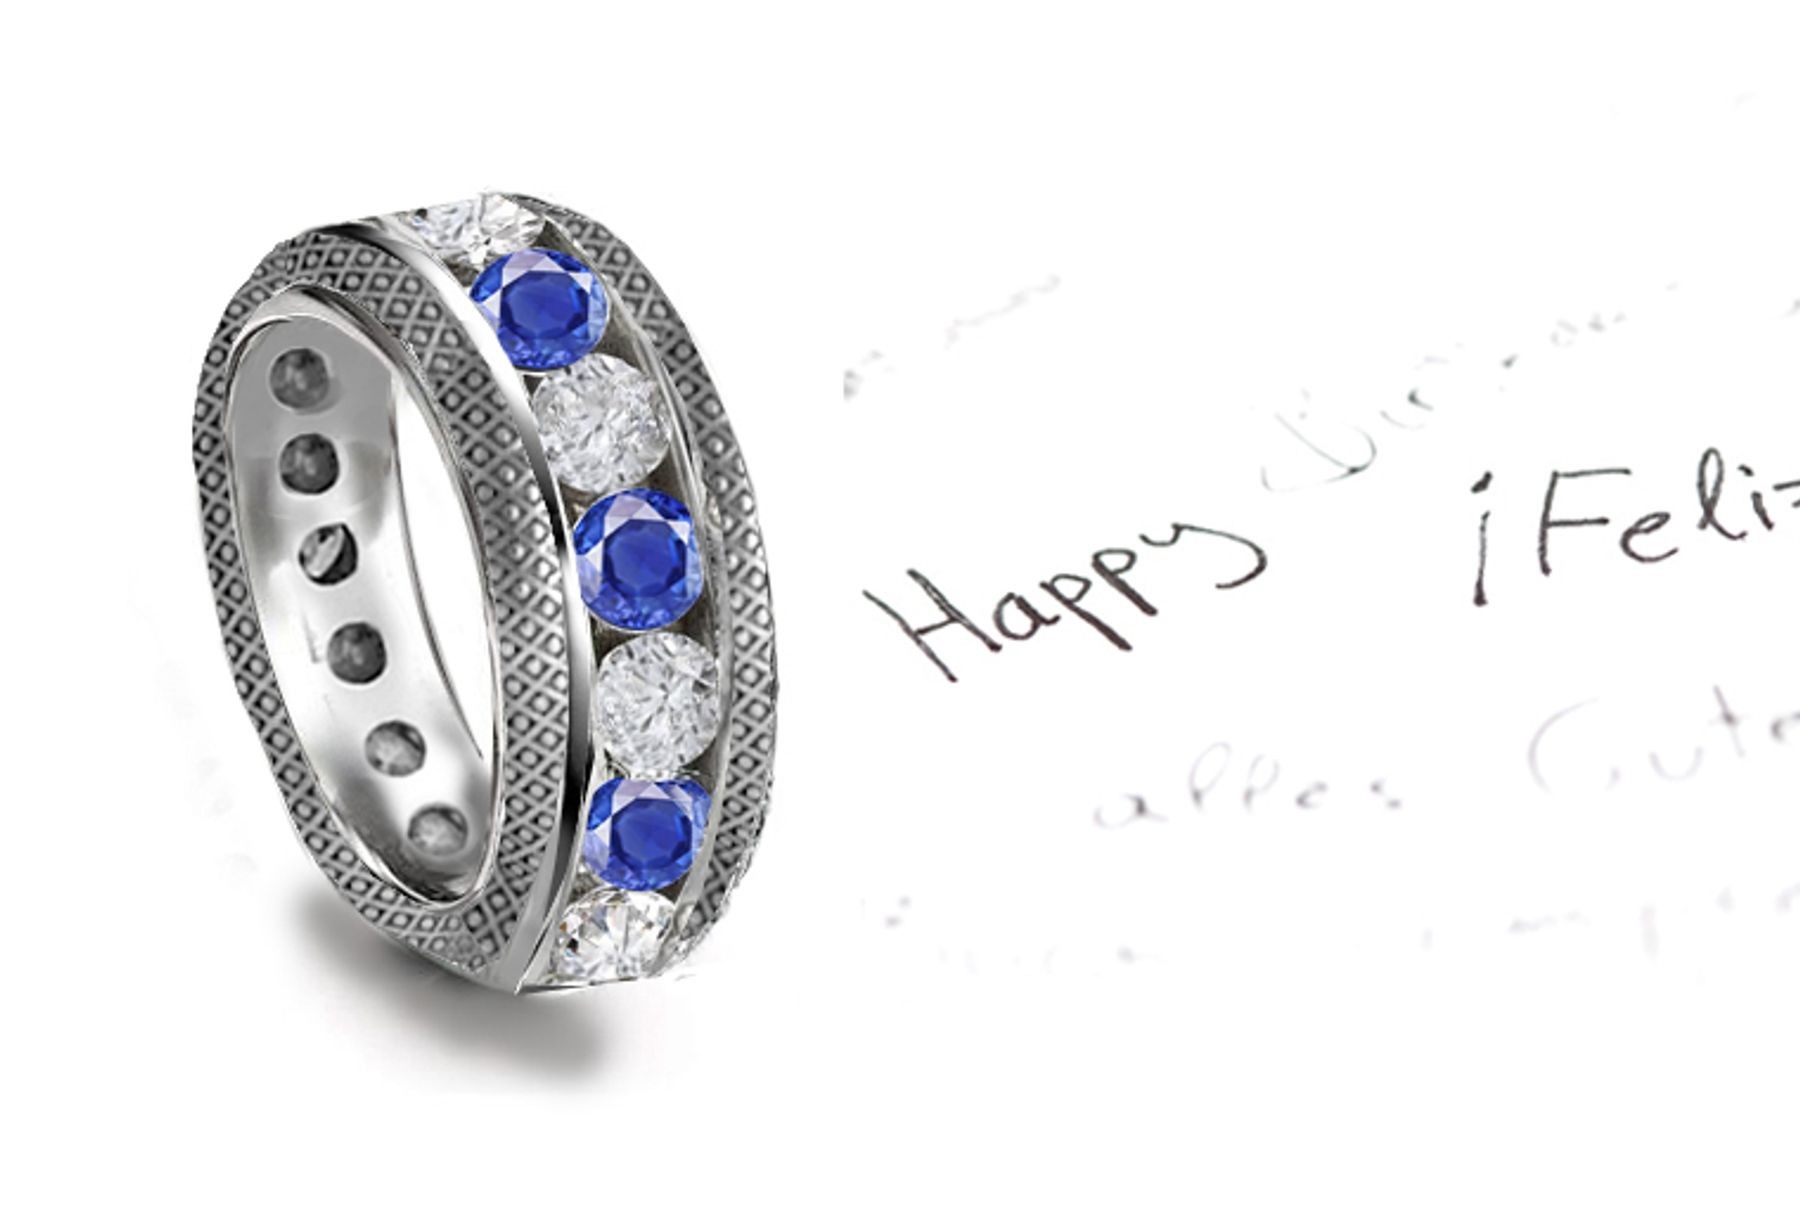 Sparkling Faceted Diamonds Sapphires are set in middle of the sapphire engagement ring.